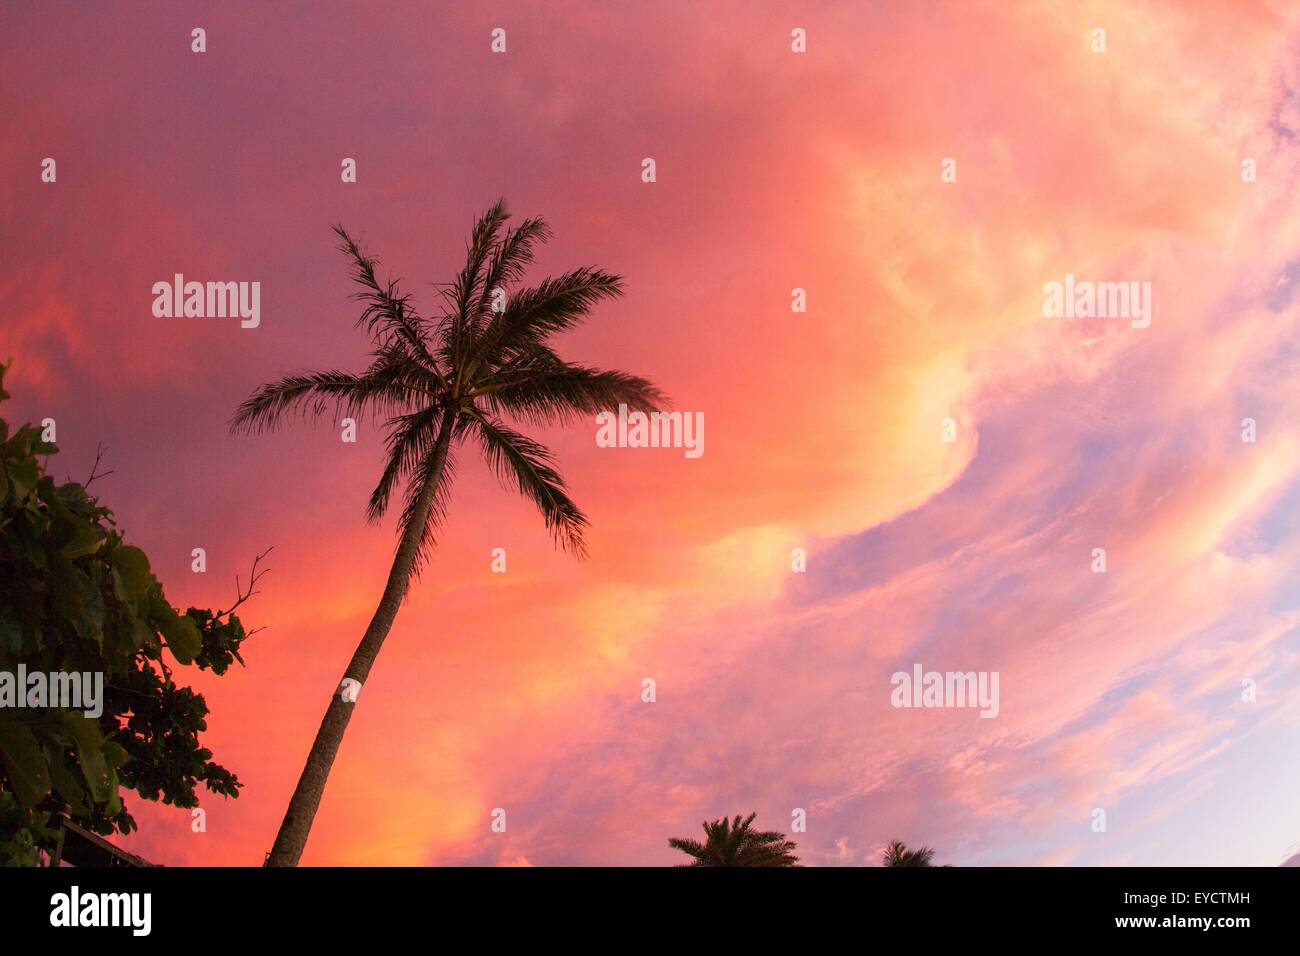 Silhouette of palm tree against pink sky Stock Photo